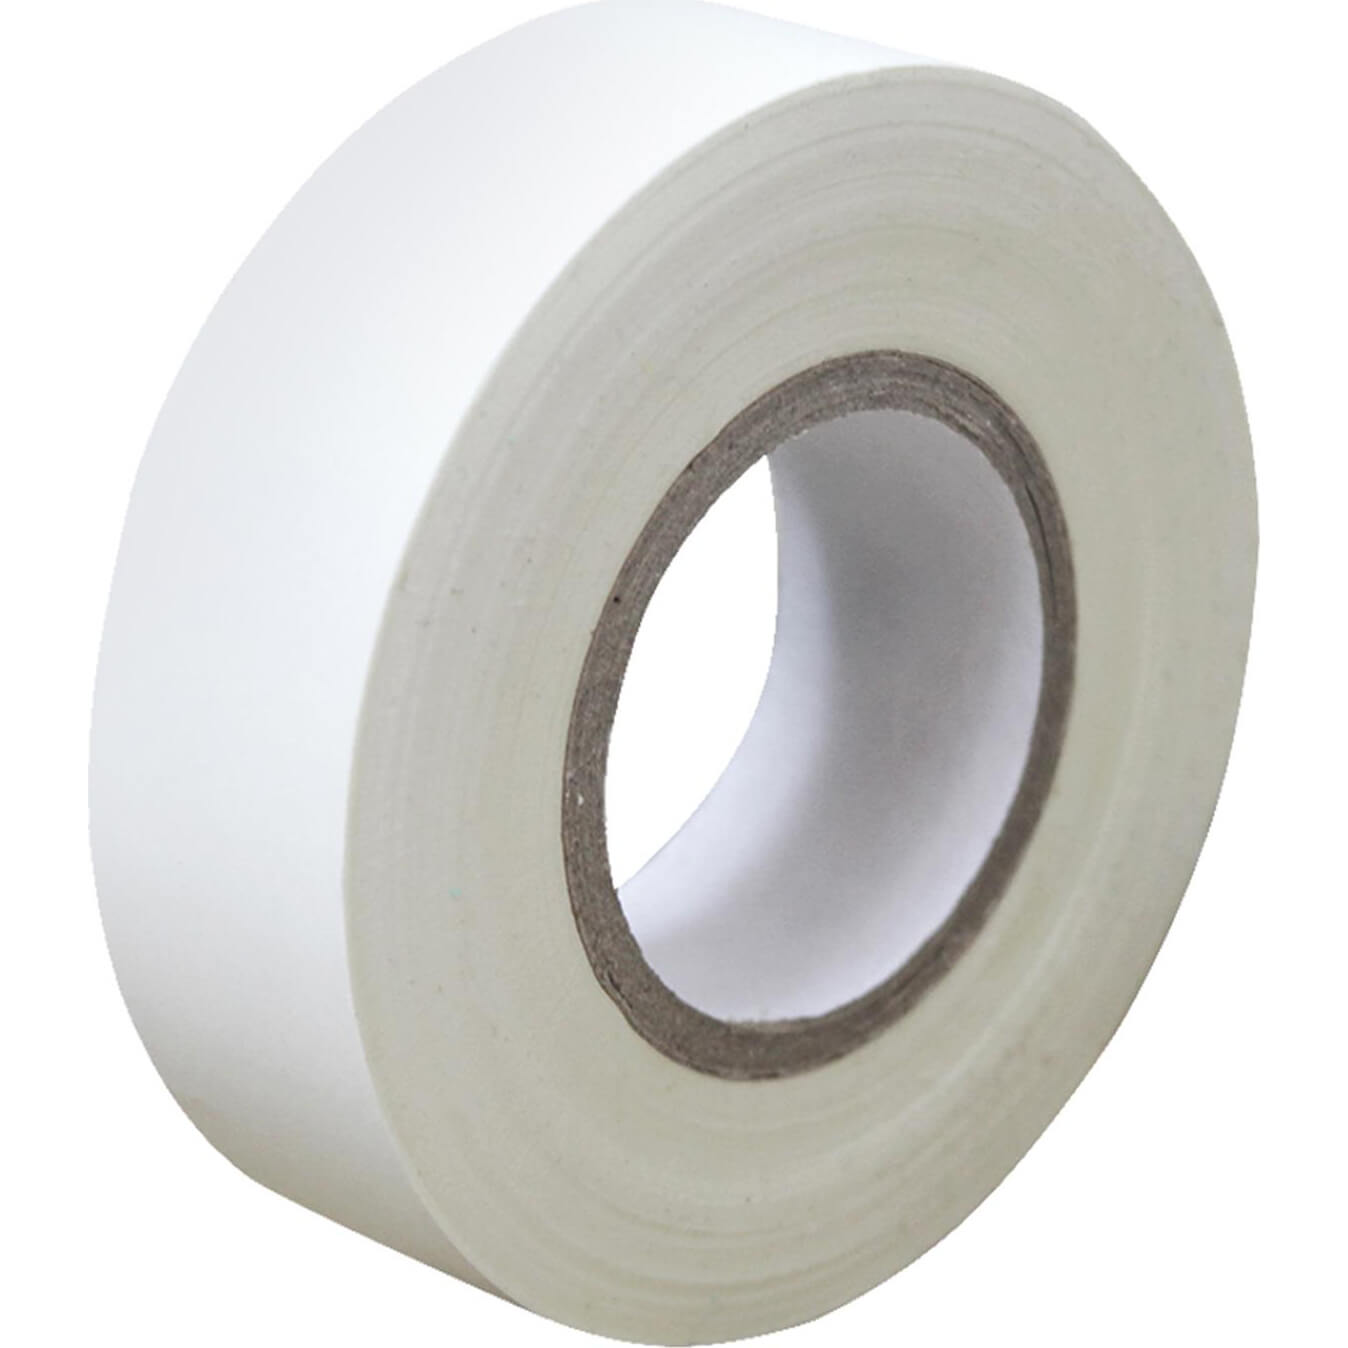 Insulation Tape White 19mm Wide x 33m Roll